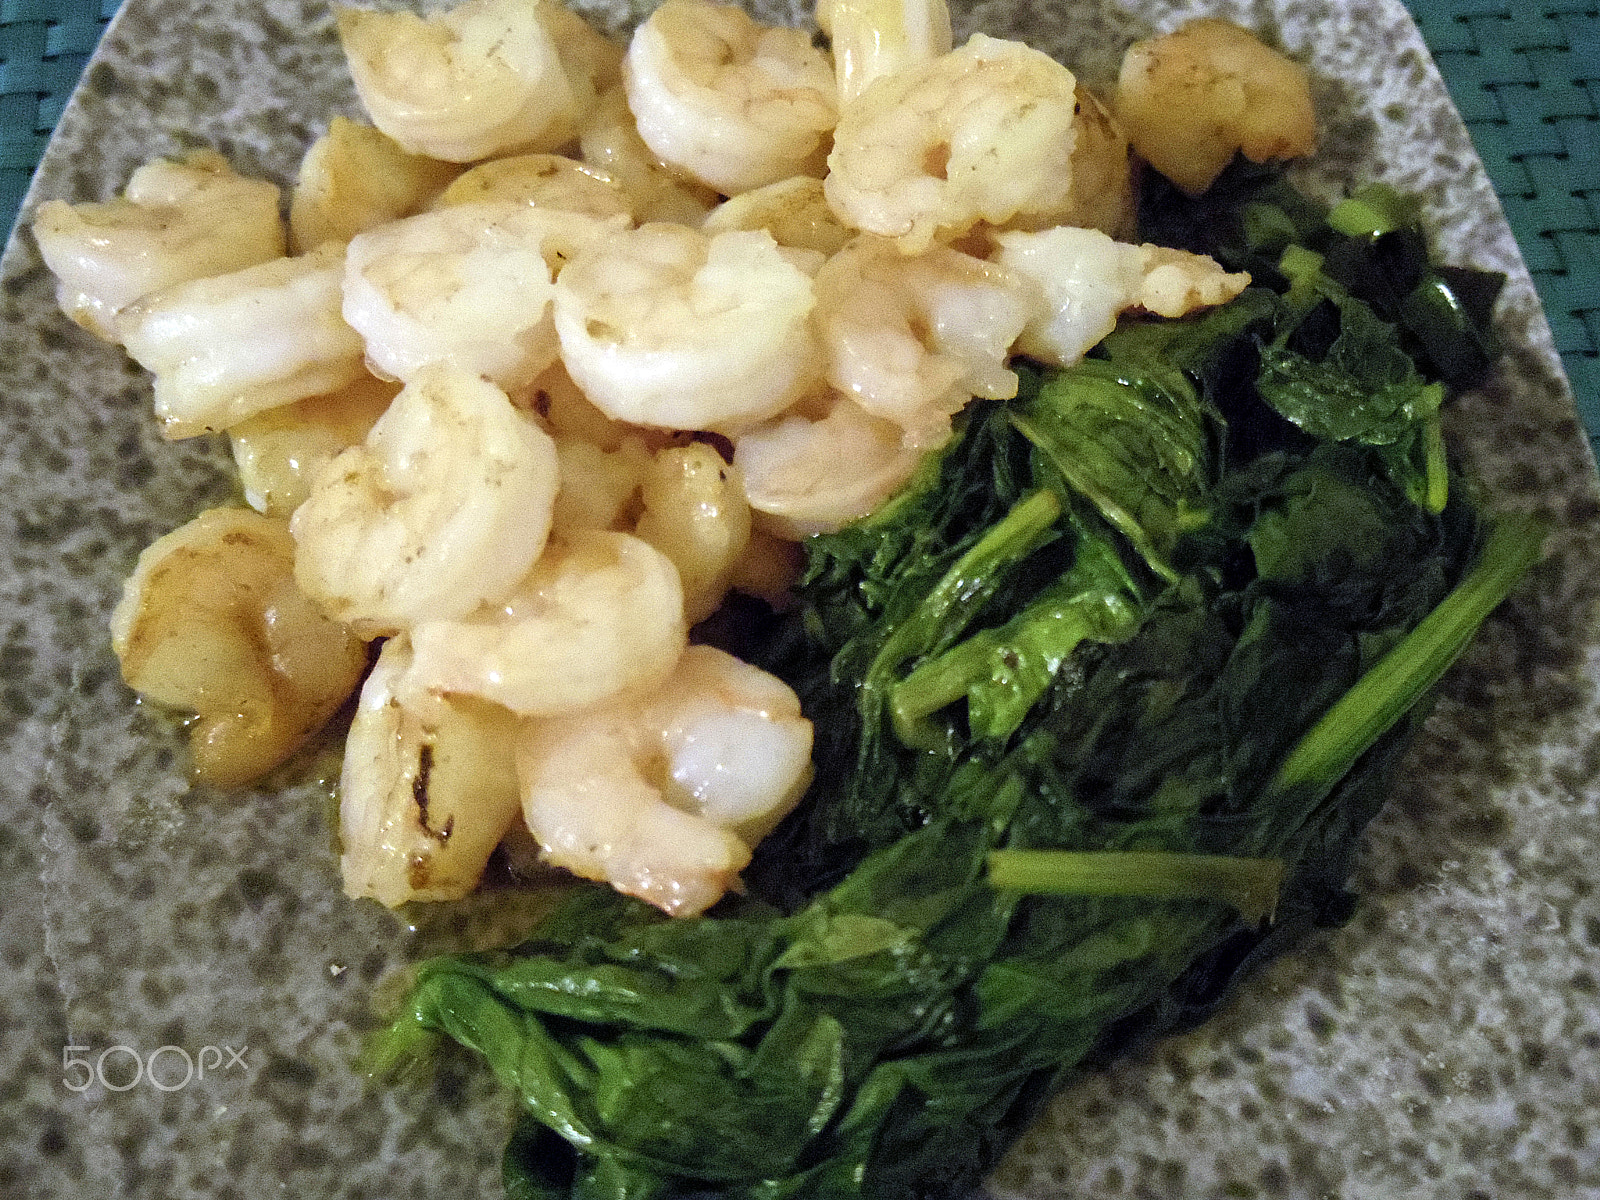 Pentax Q-S1 sample photo. Shrimp and sauteed spinach photography